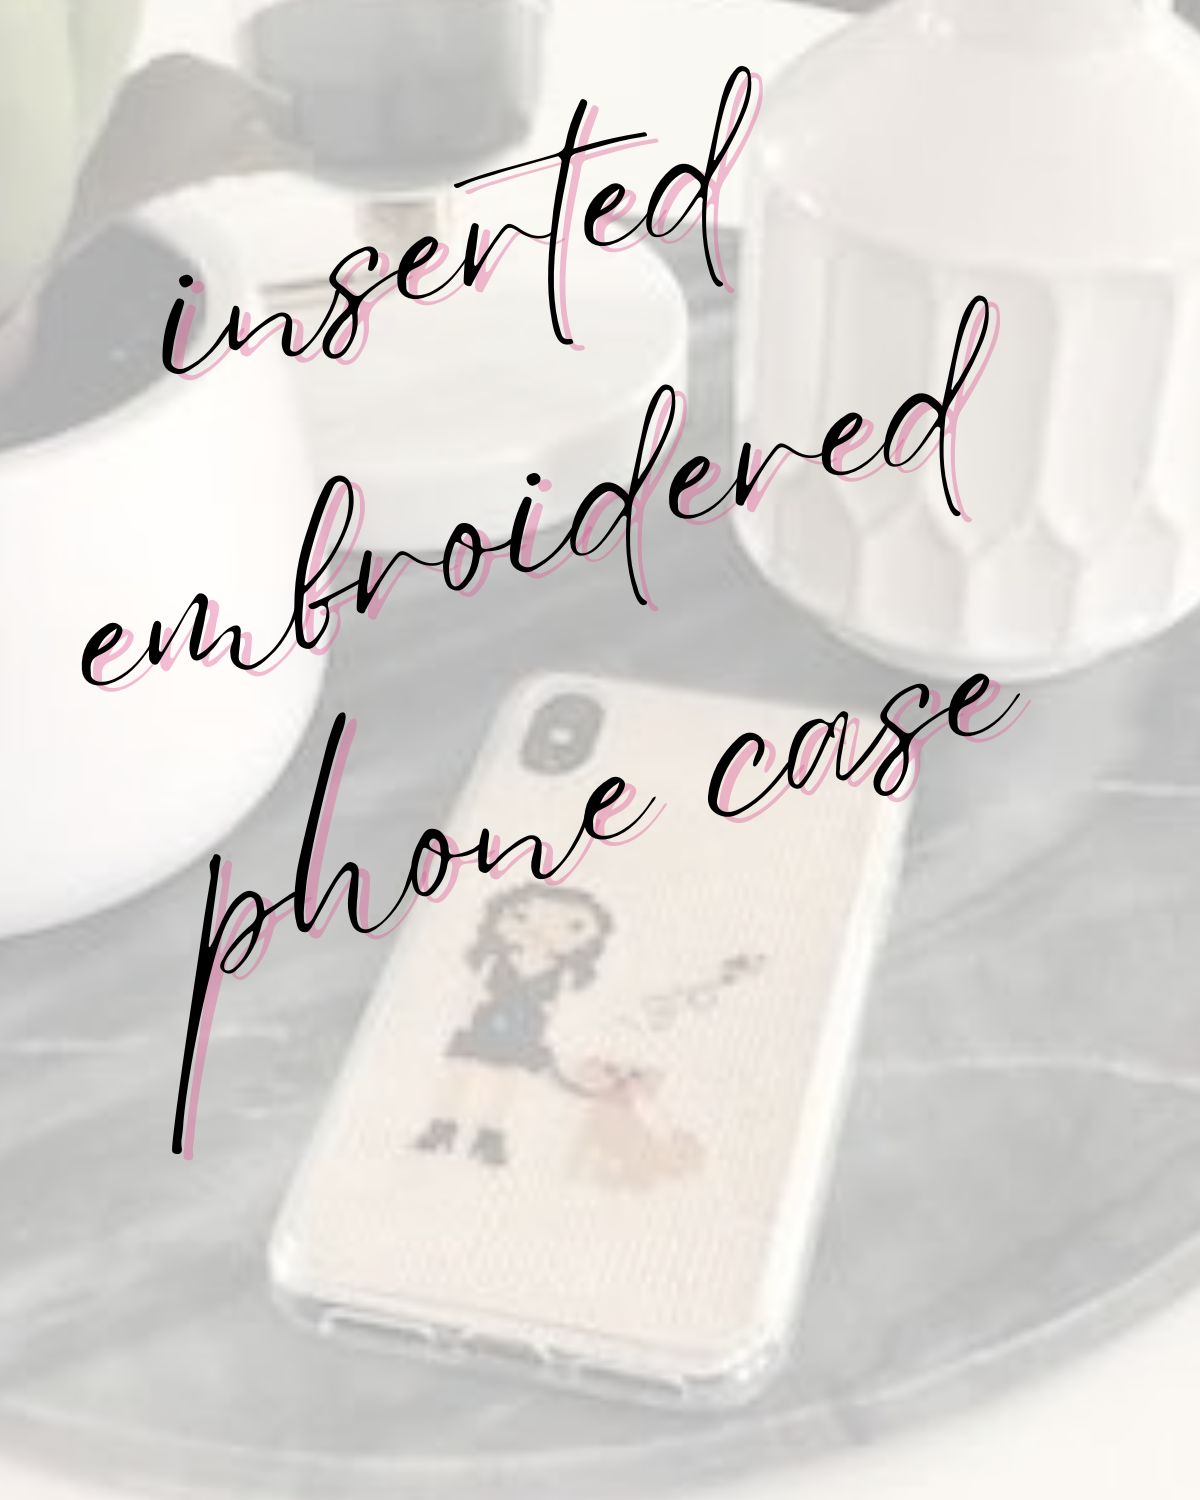 A phone case with an embroidery piece inserted